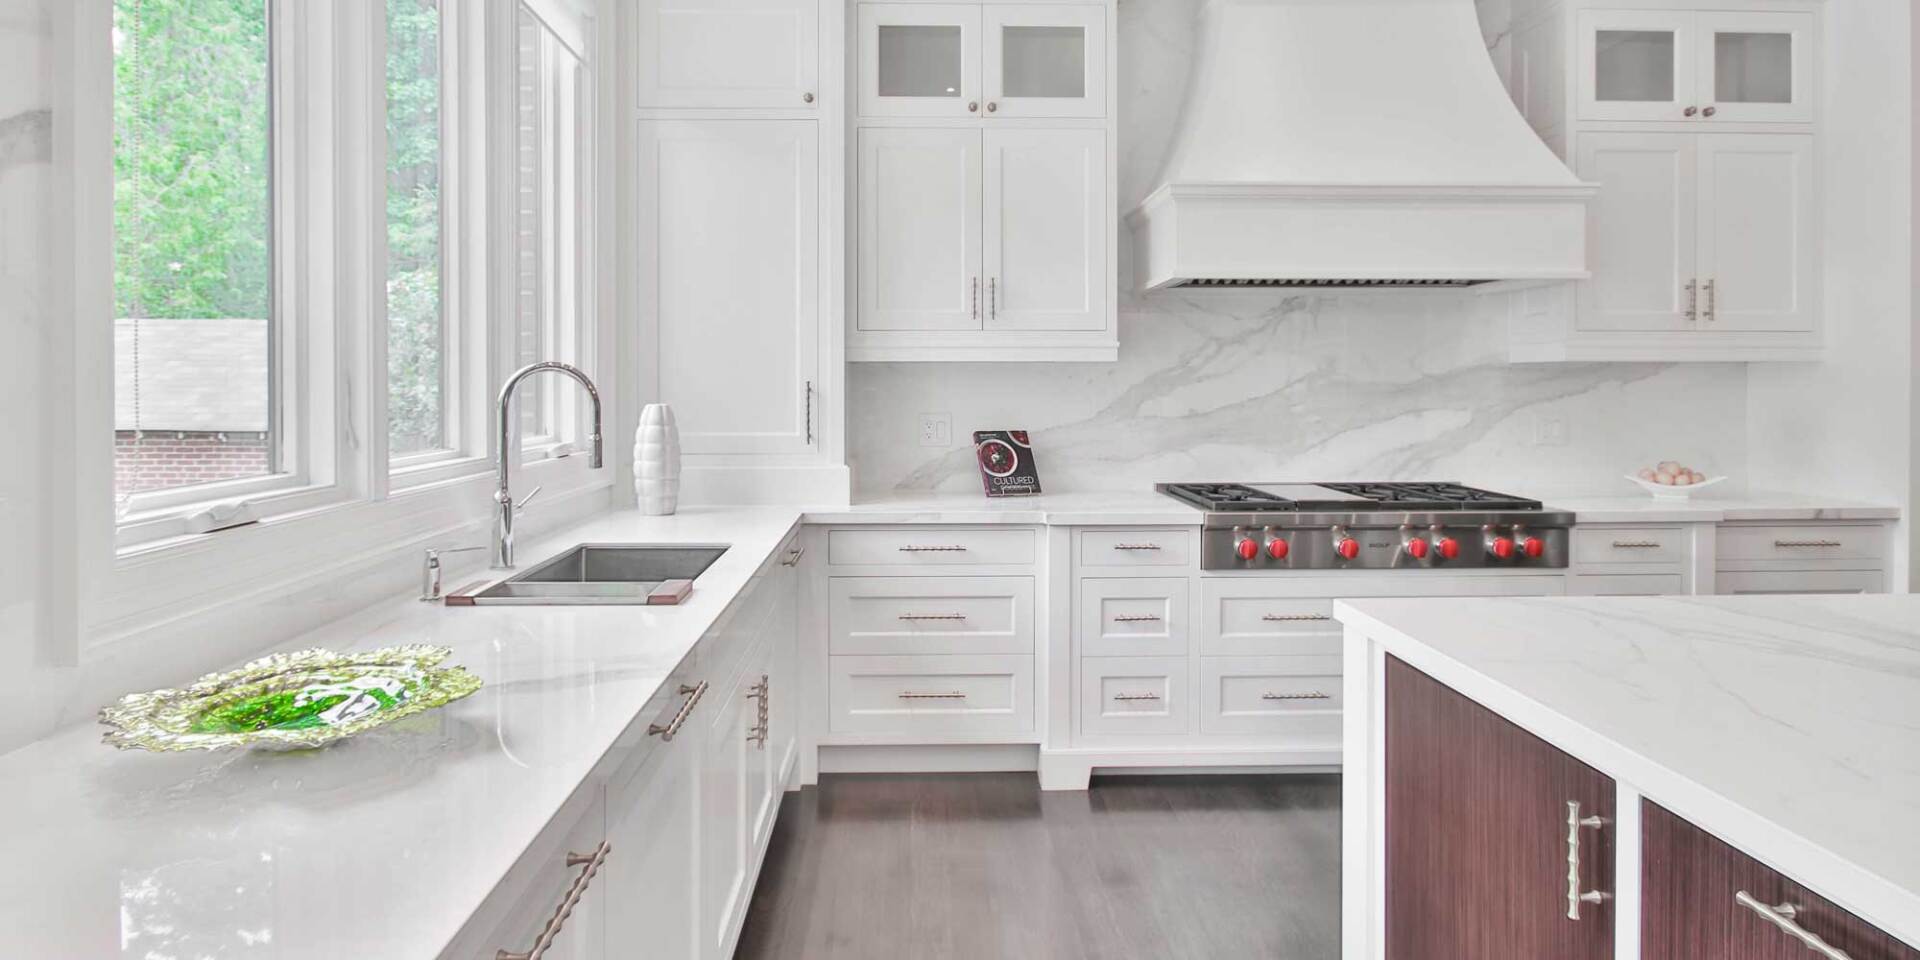 A marble backsplash in an all white Hamptons style kitchen.